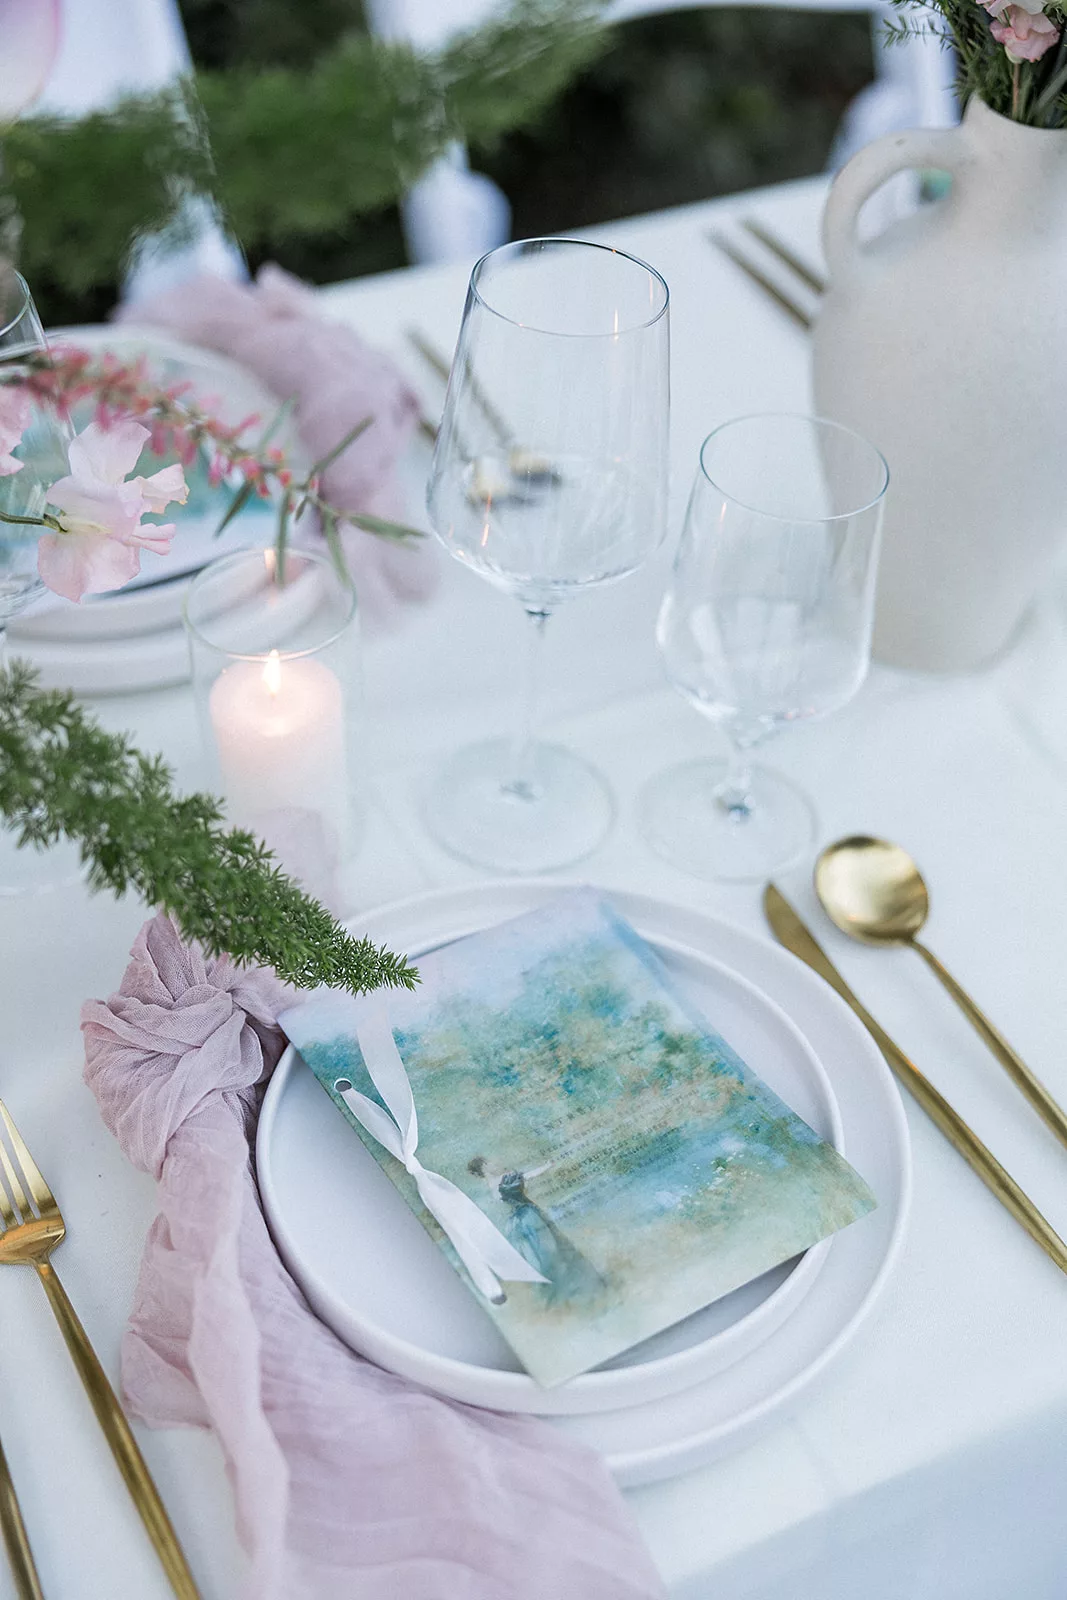 Details of an outdoor wedding reception table setting with pink linen and gold silverware